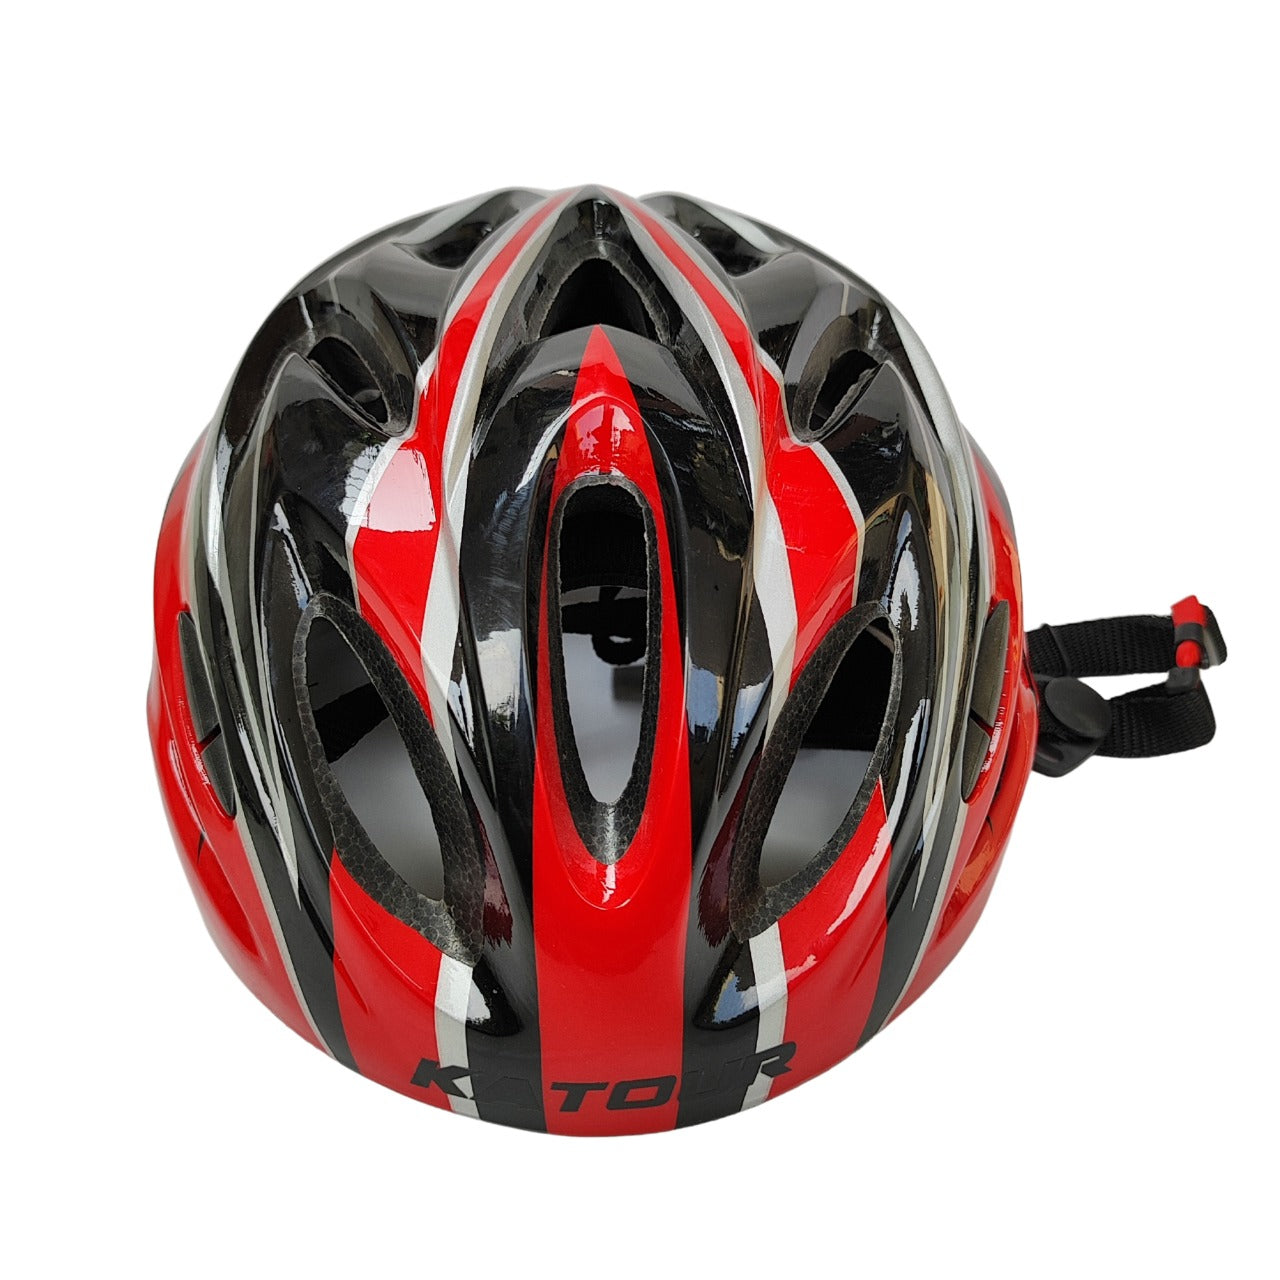 Bicycle helmet red color top view by omobikes